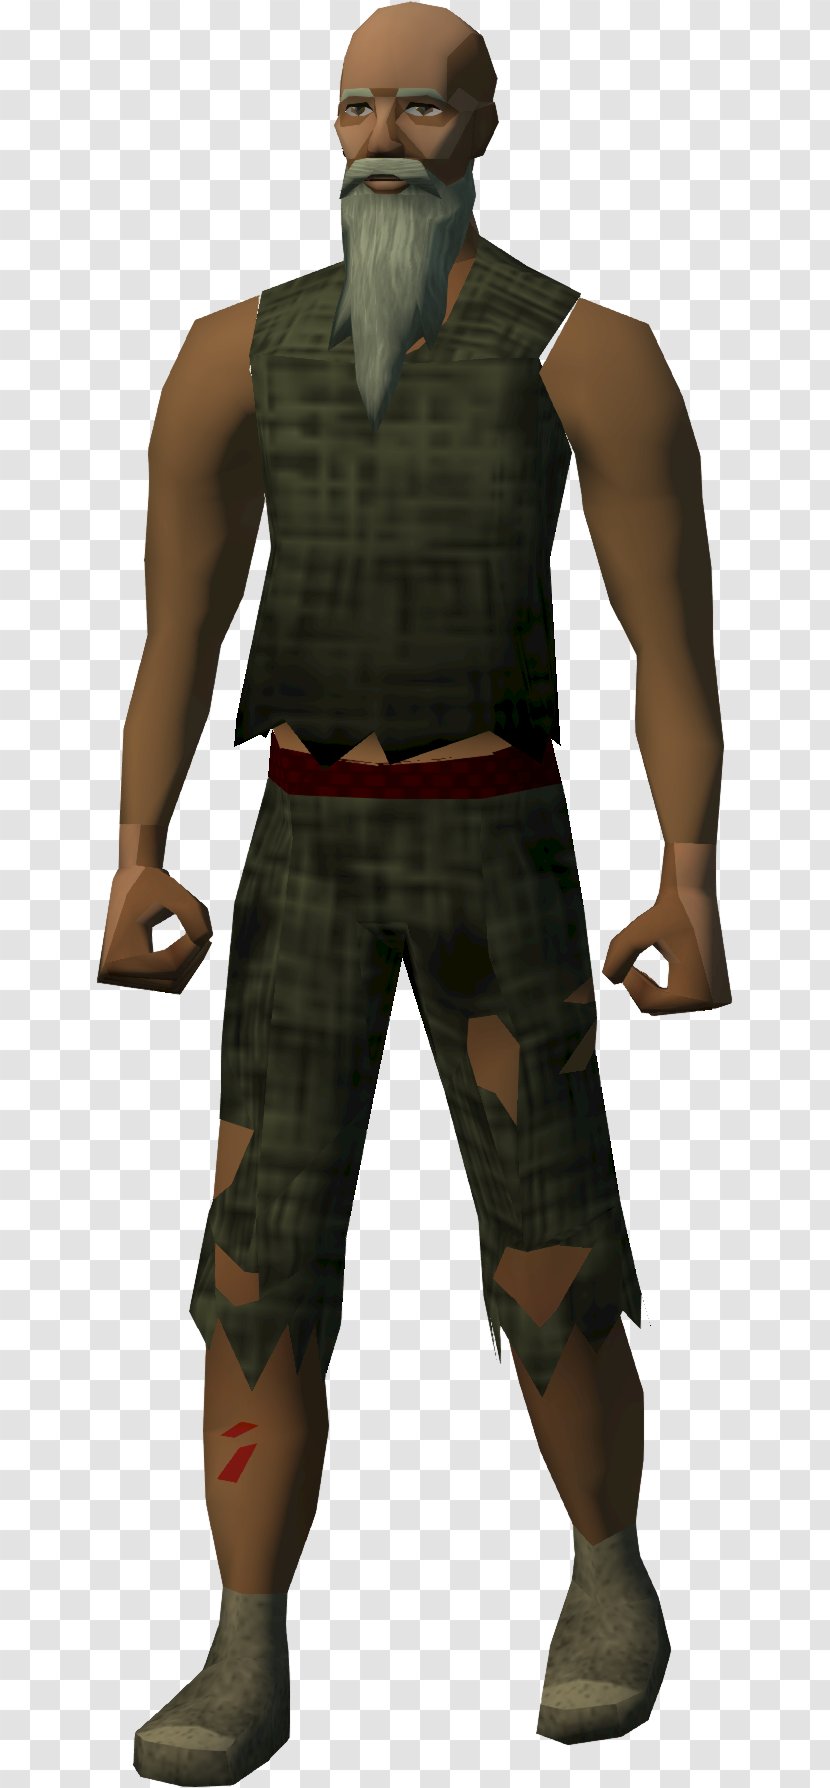 RuneScape Wikia Man - Outerwear - OLD MAN Transparent PNG